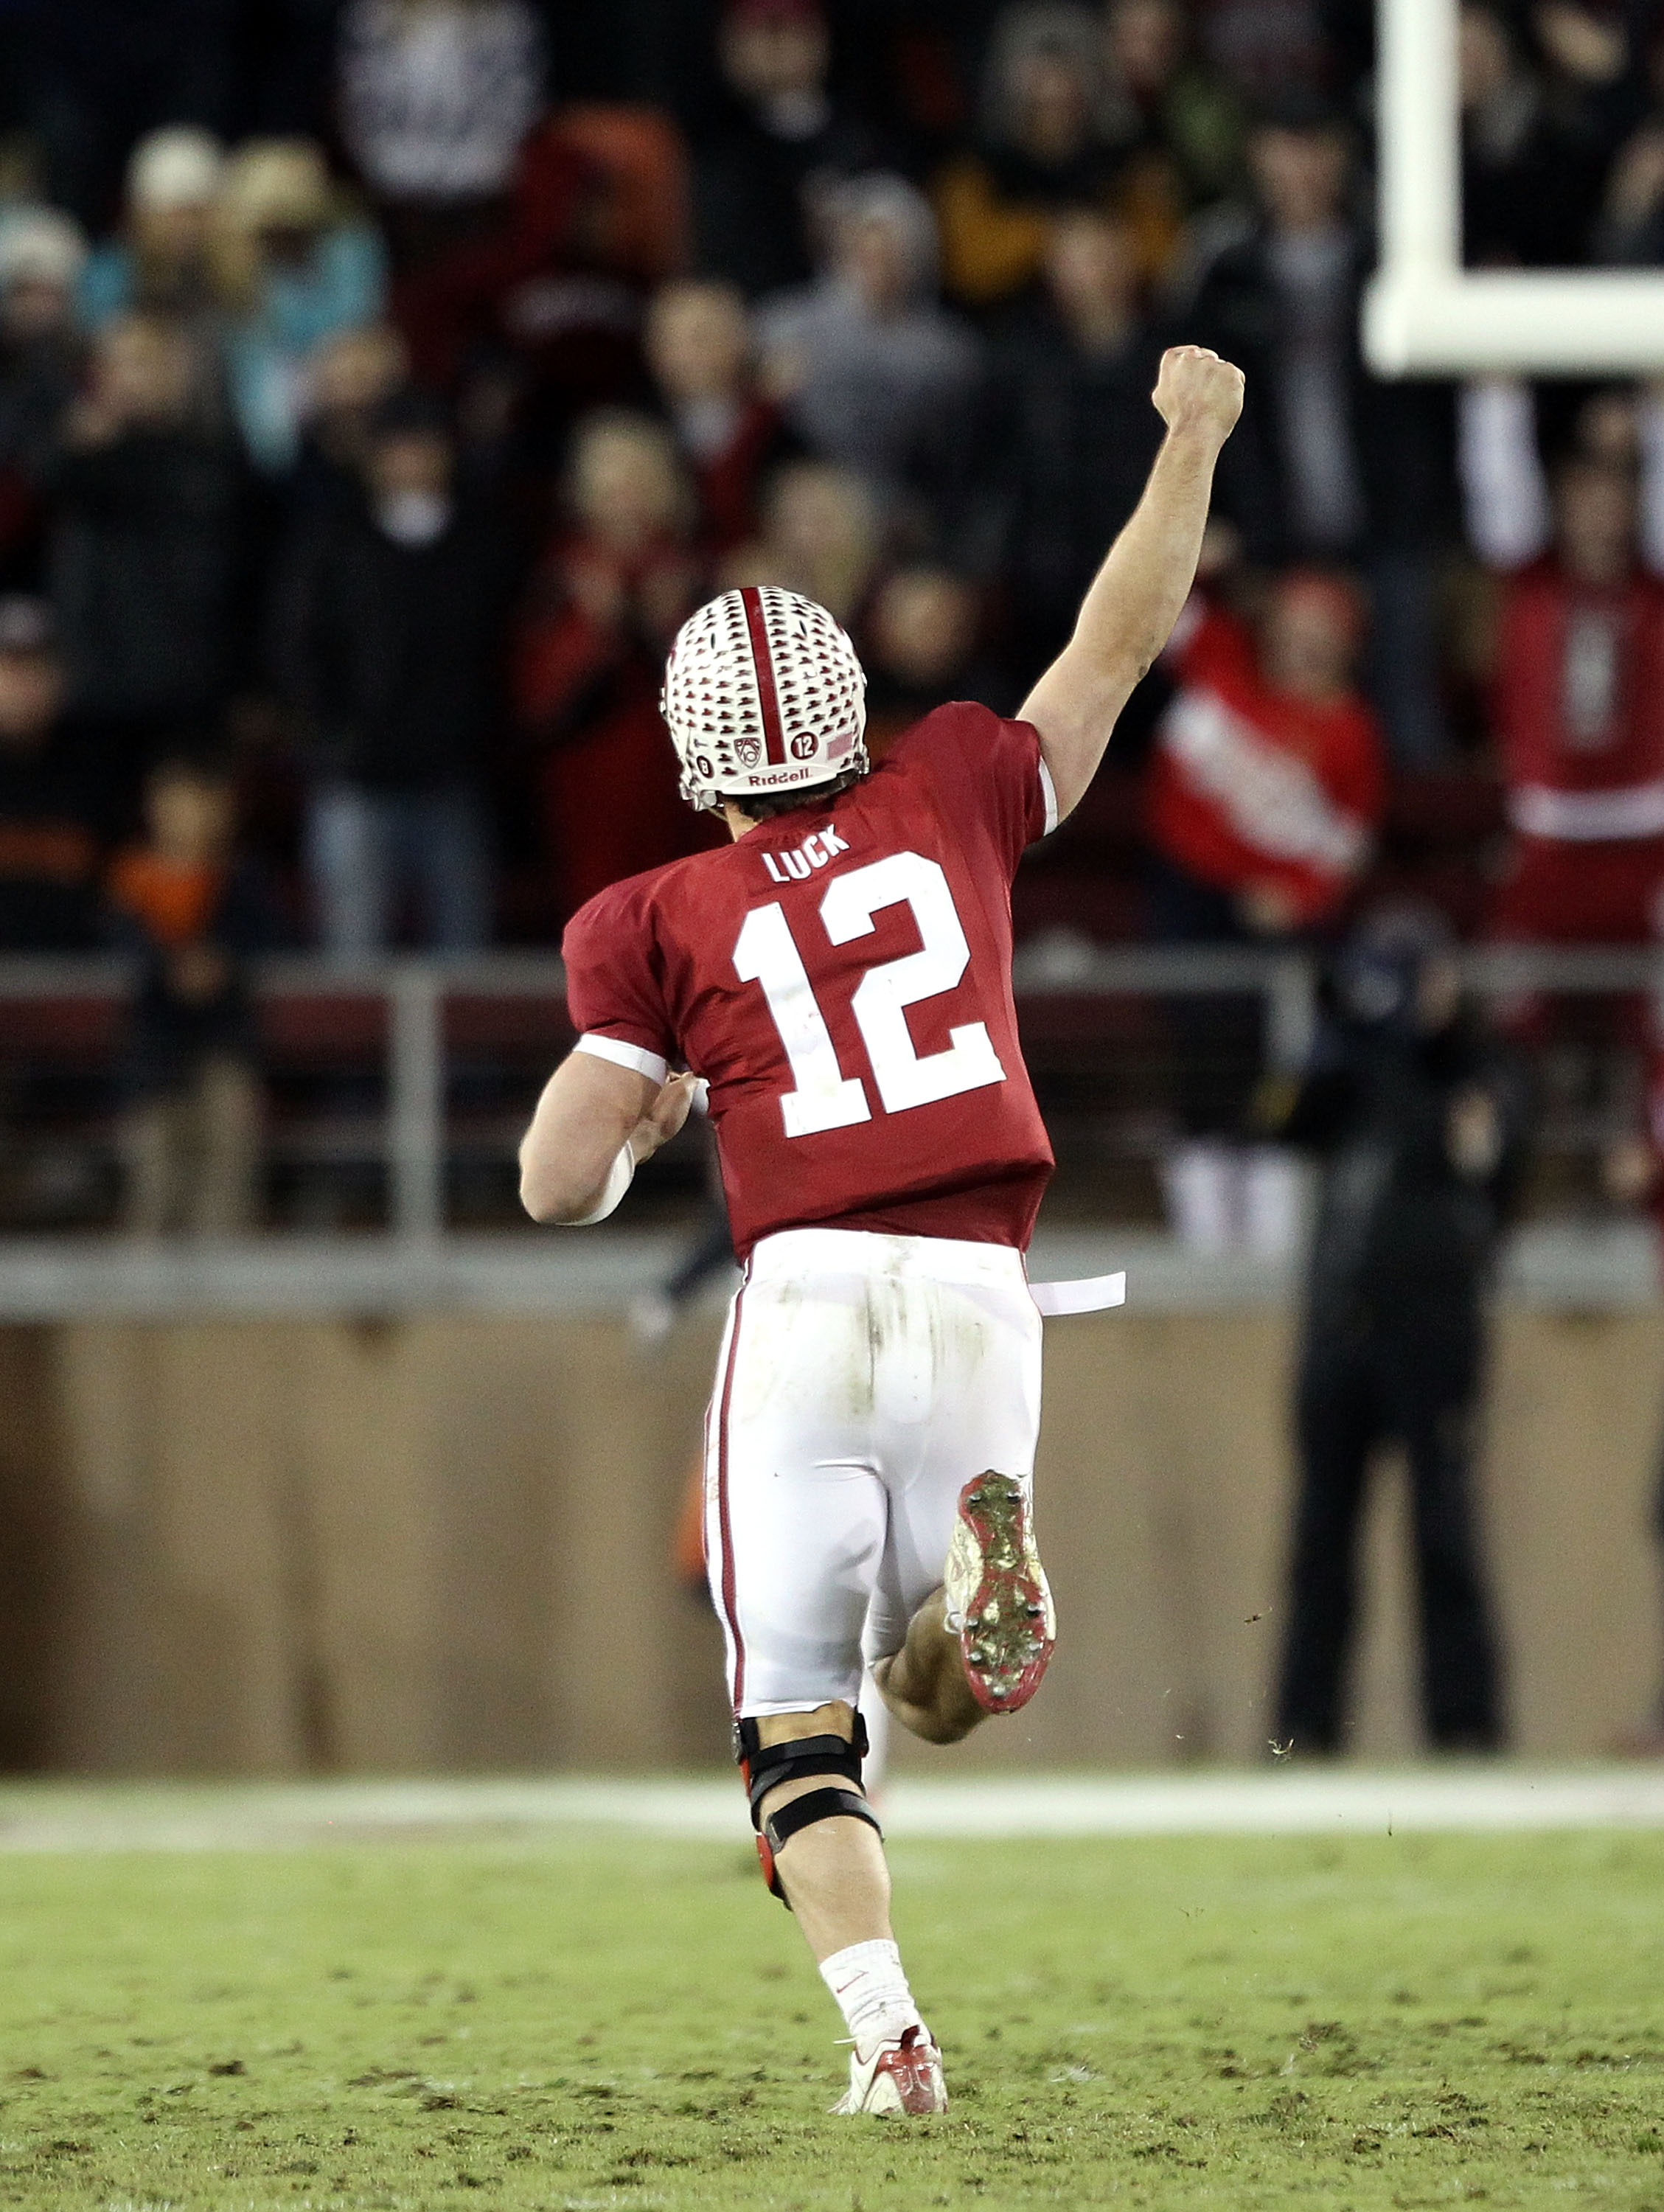 PALO ALTO, CA - NOVEMBER 27:  Andrew Luck #12  of the Stanford Cardinal celebrates after they scored a touchdown during their game against the Oregon State Beavers at Stanford Stadium on November 27, 2010 in Palo Alto, California.  (Photo by Ezra Shaw/Get